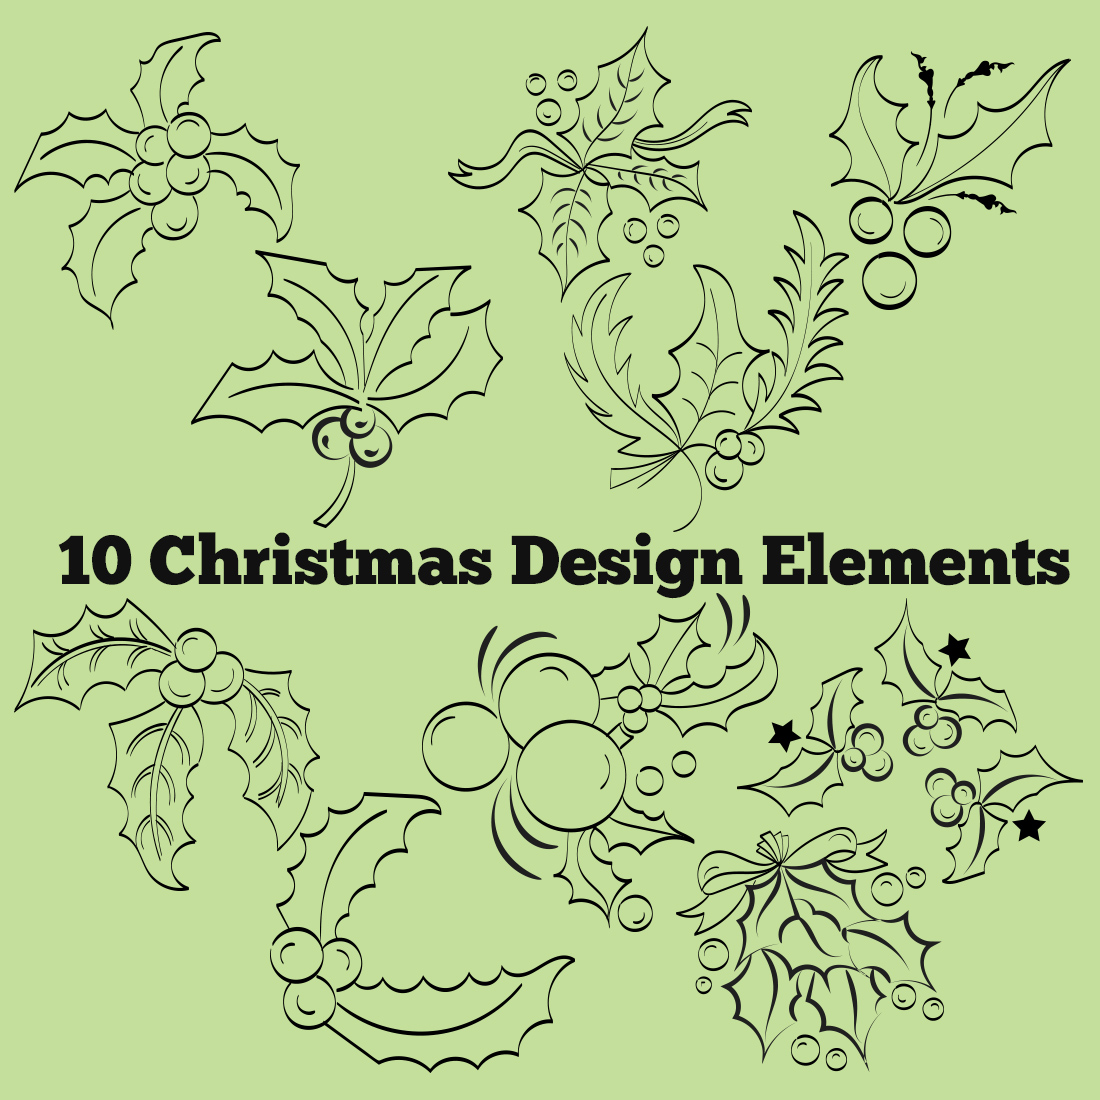 Christmas Elements Design cover image.